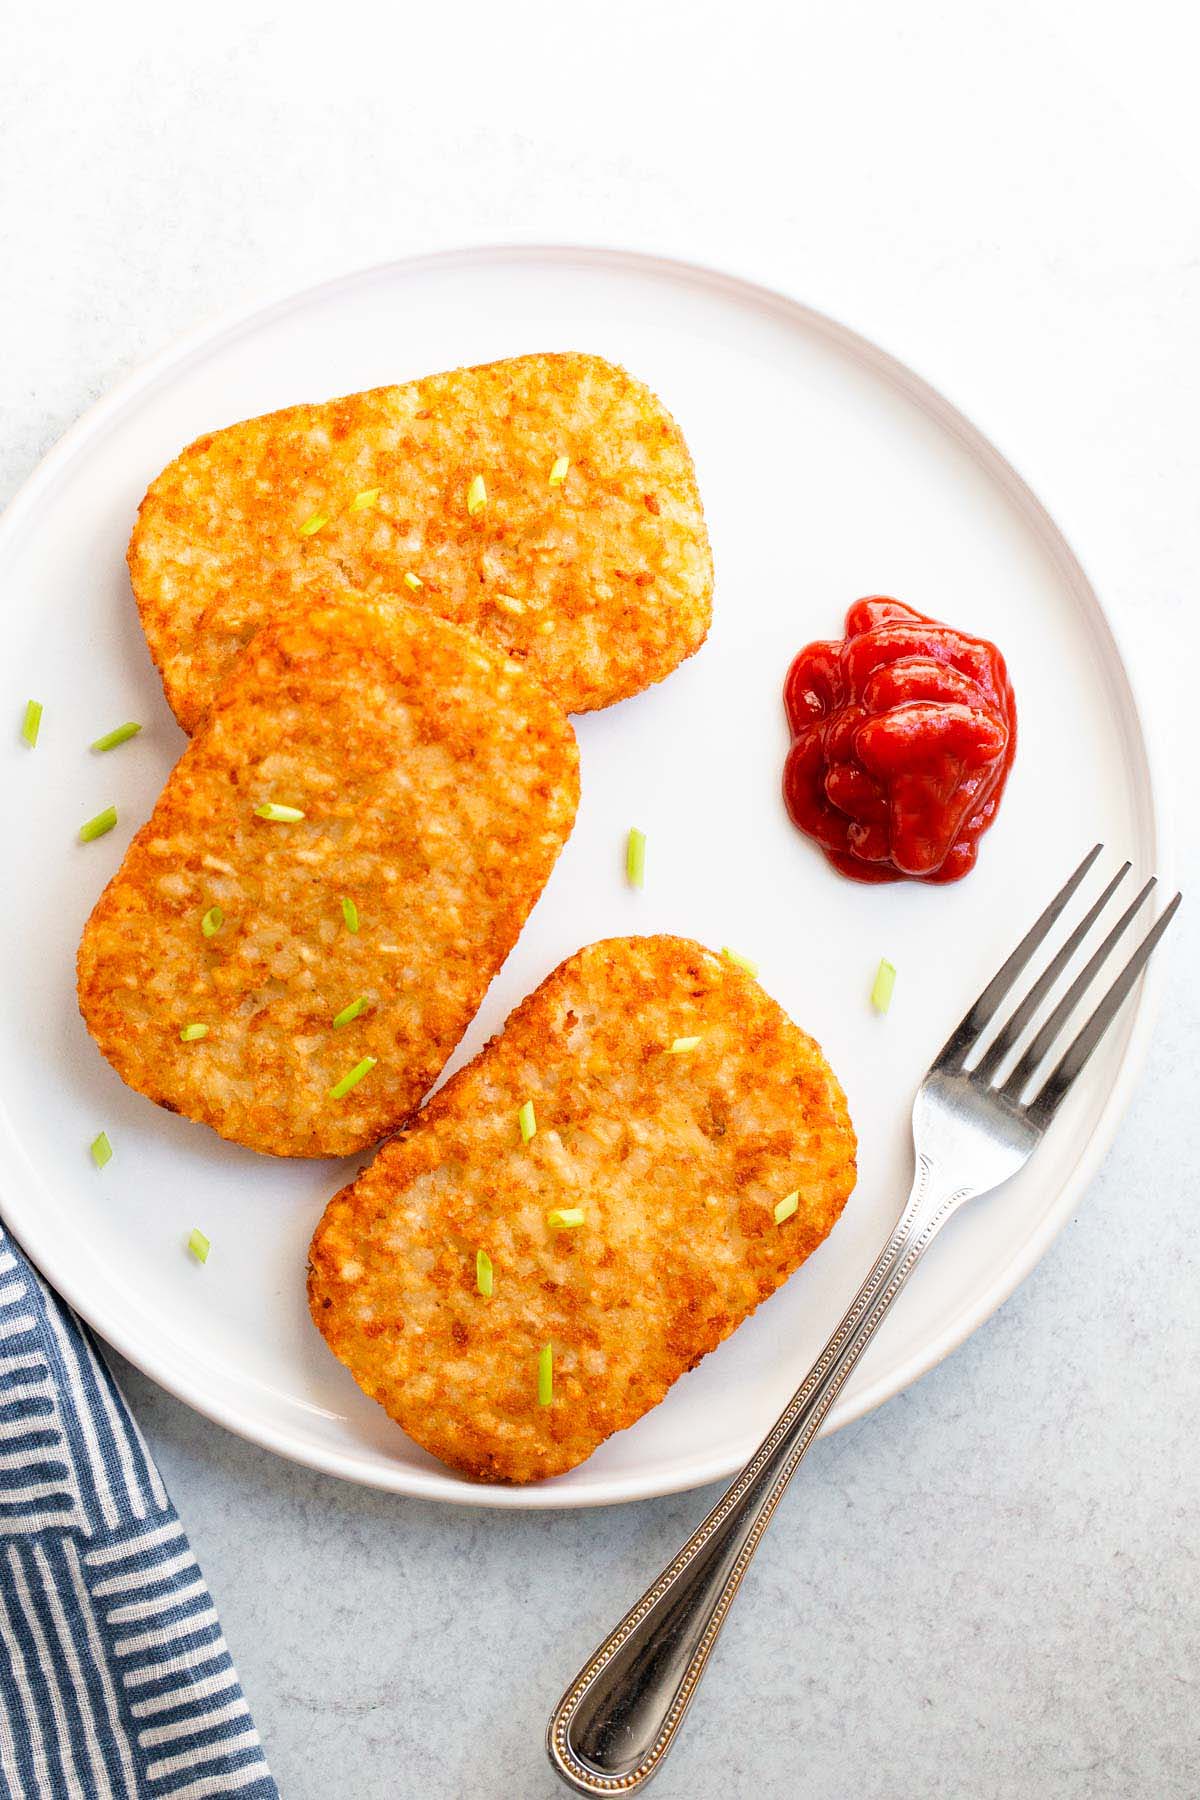 Hash brown patties with ketchup on a white plate.